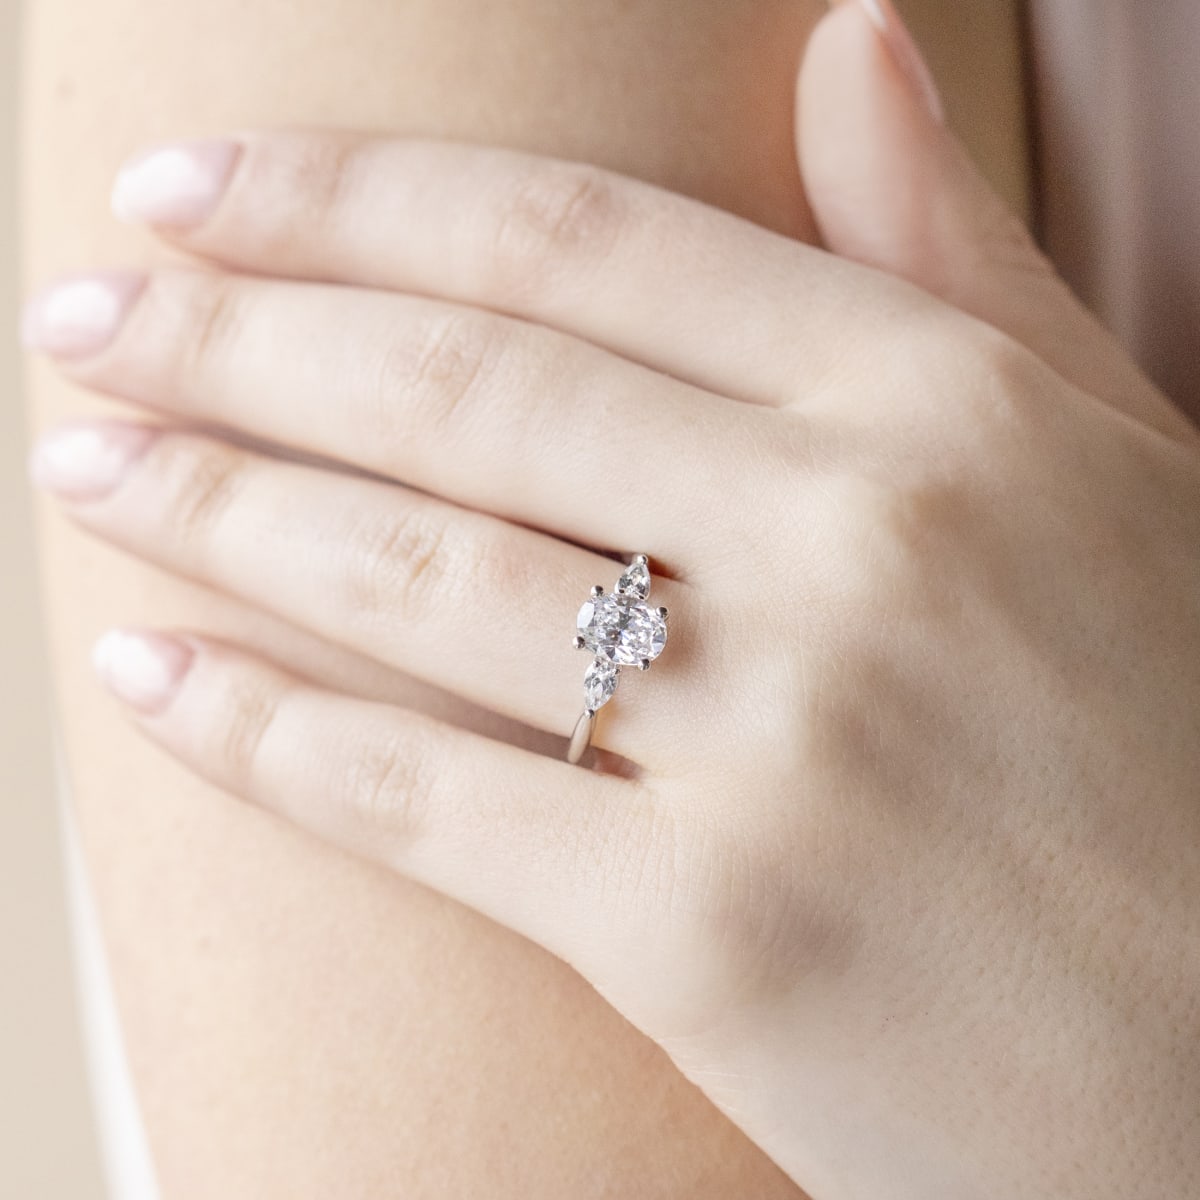 Discovering the Best Place to Buy Wedding Rings